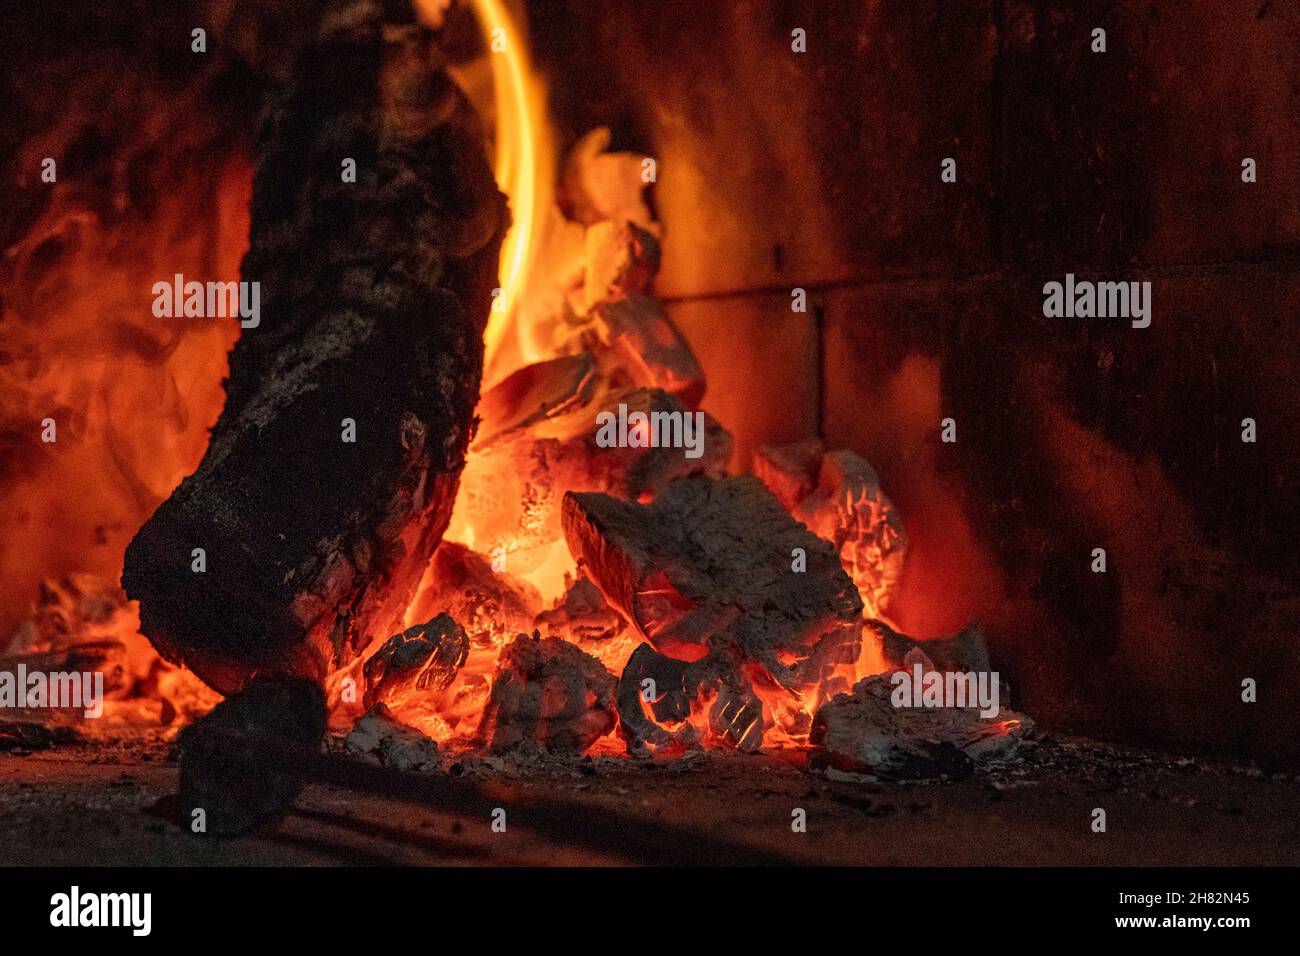 Wallpaper of a fire on a brick background. Stock Photo